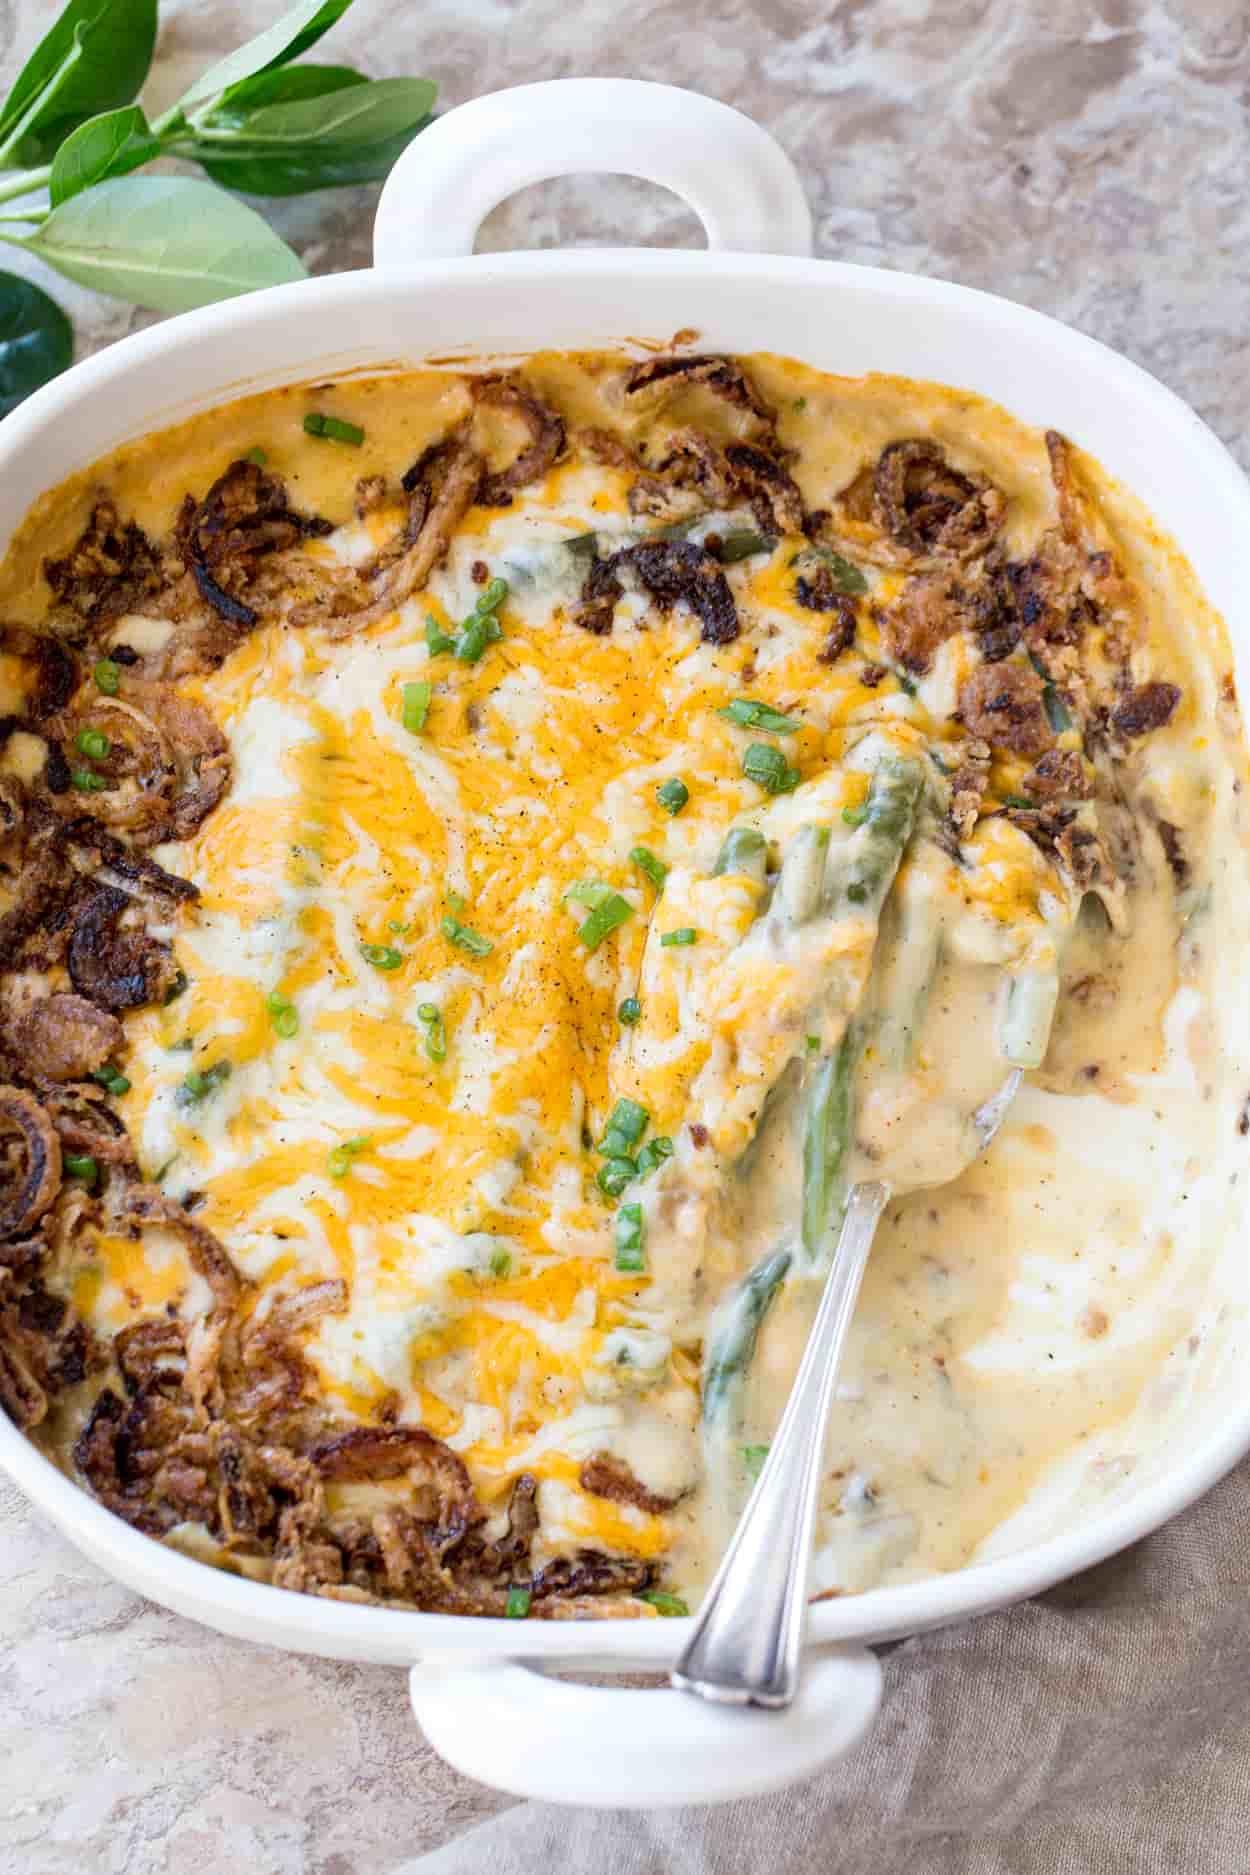 Green bean casserole in a casserole dish with a spoon. Topped with fresh greens, cheese, and fried onion rings.